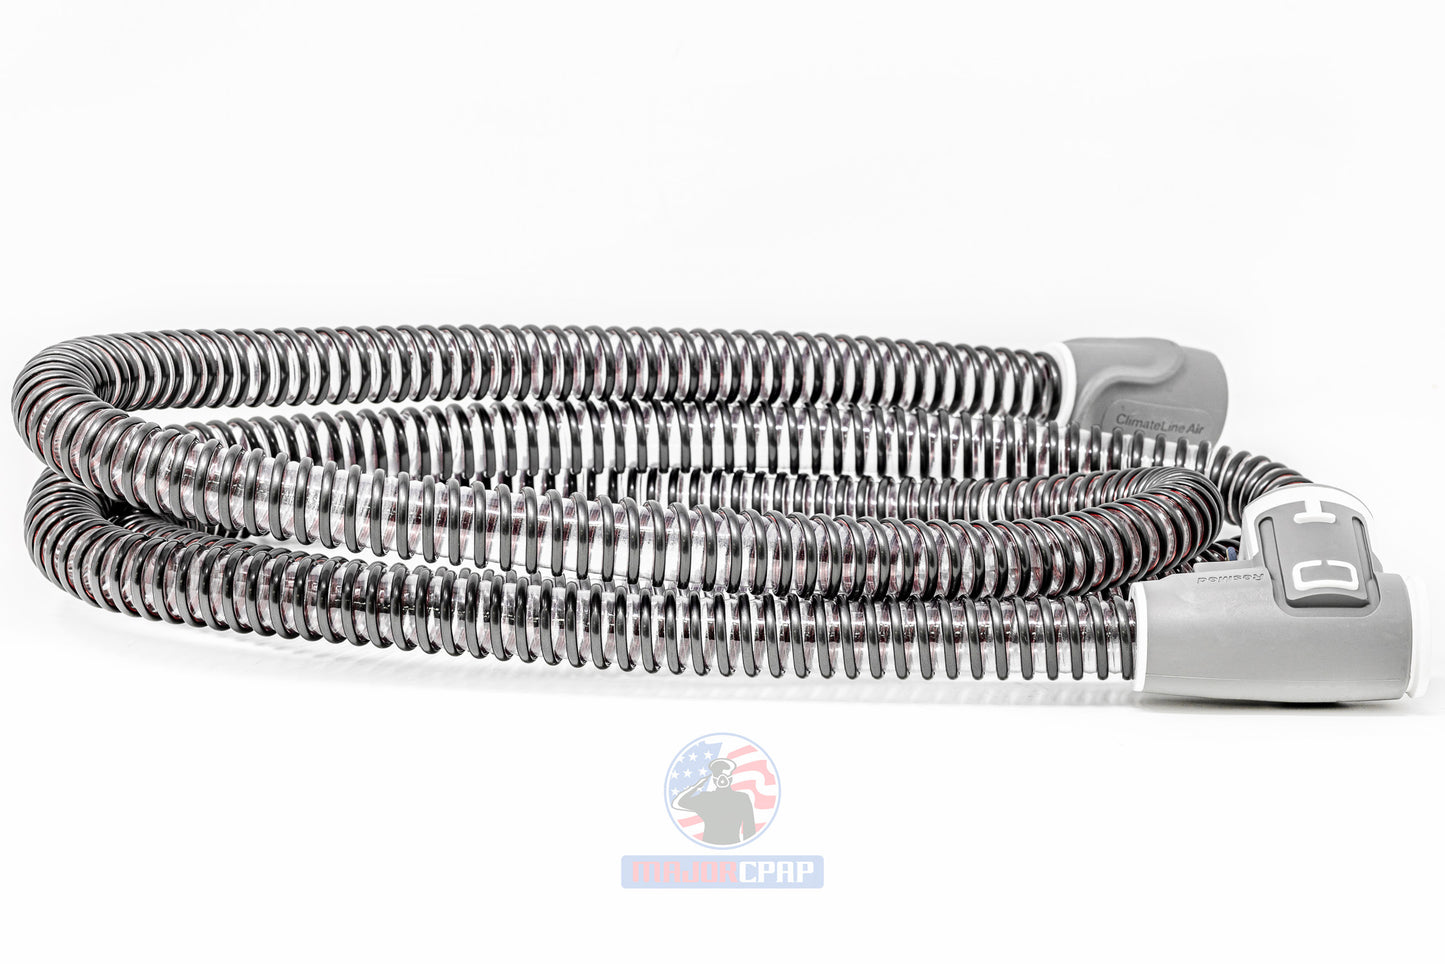 ResMed ClimateLineAir Heated Tube For AirSense/AirCurve 10 Machines